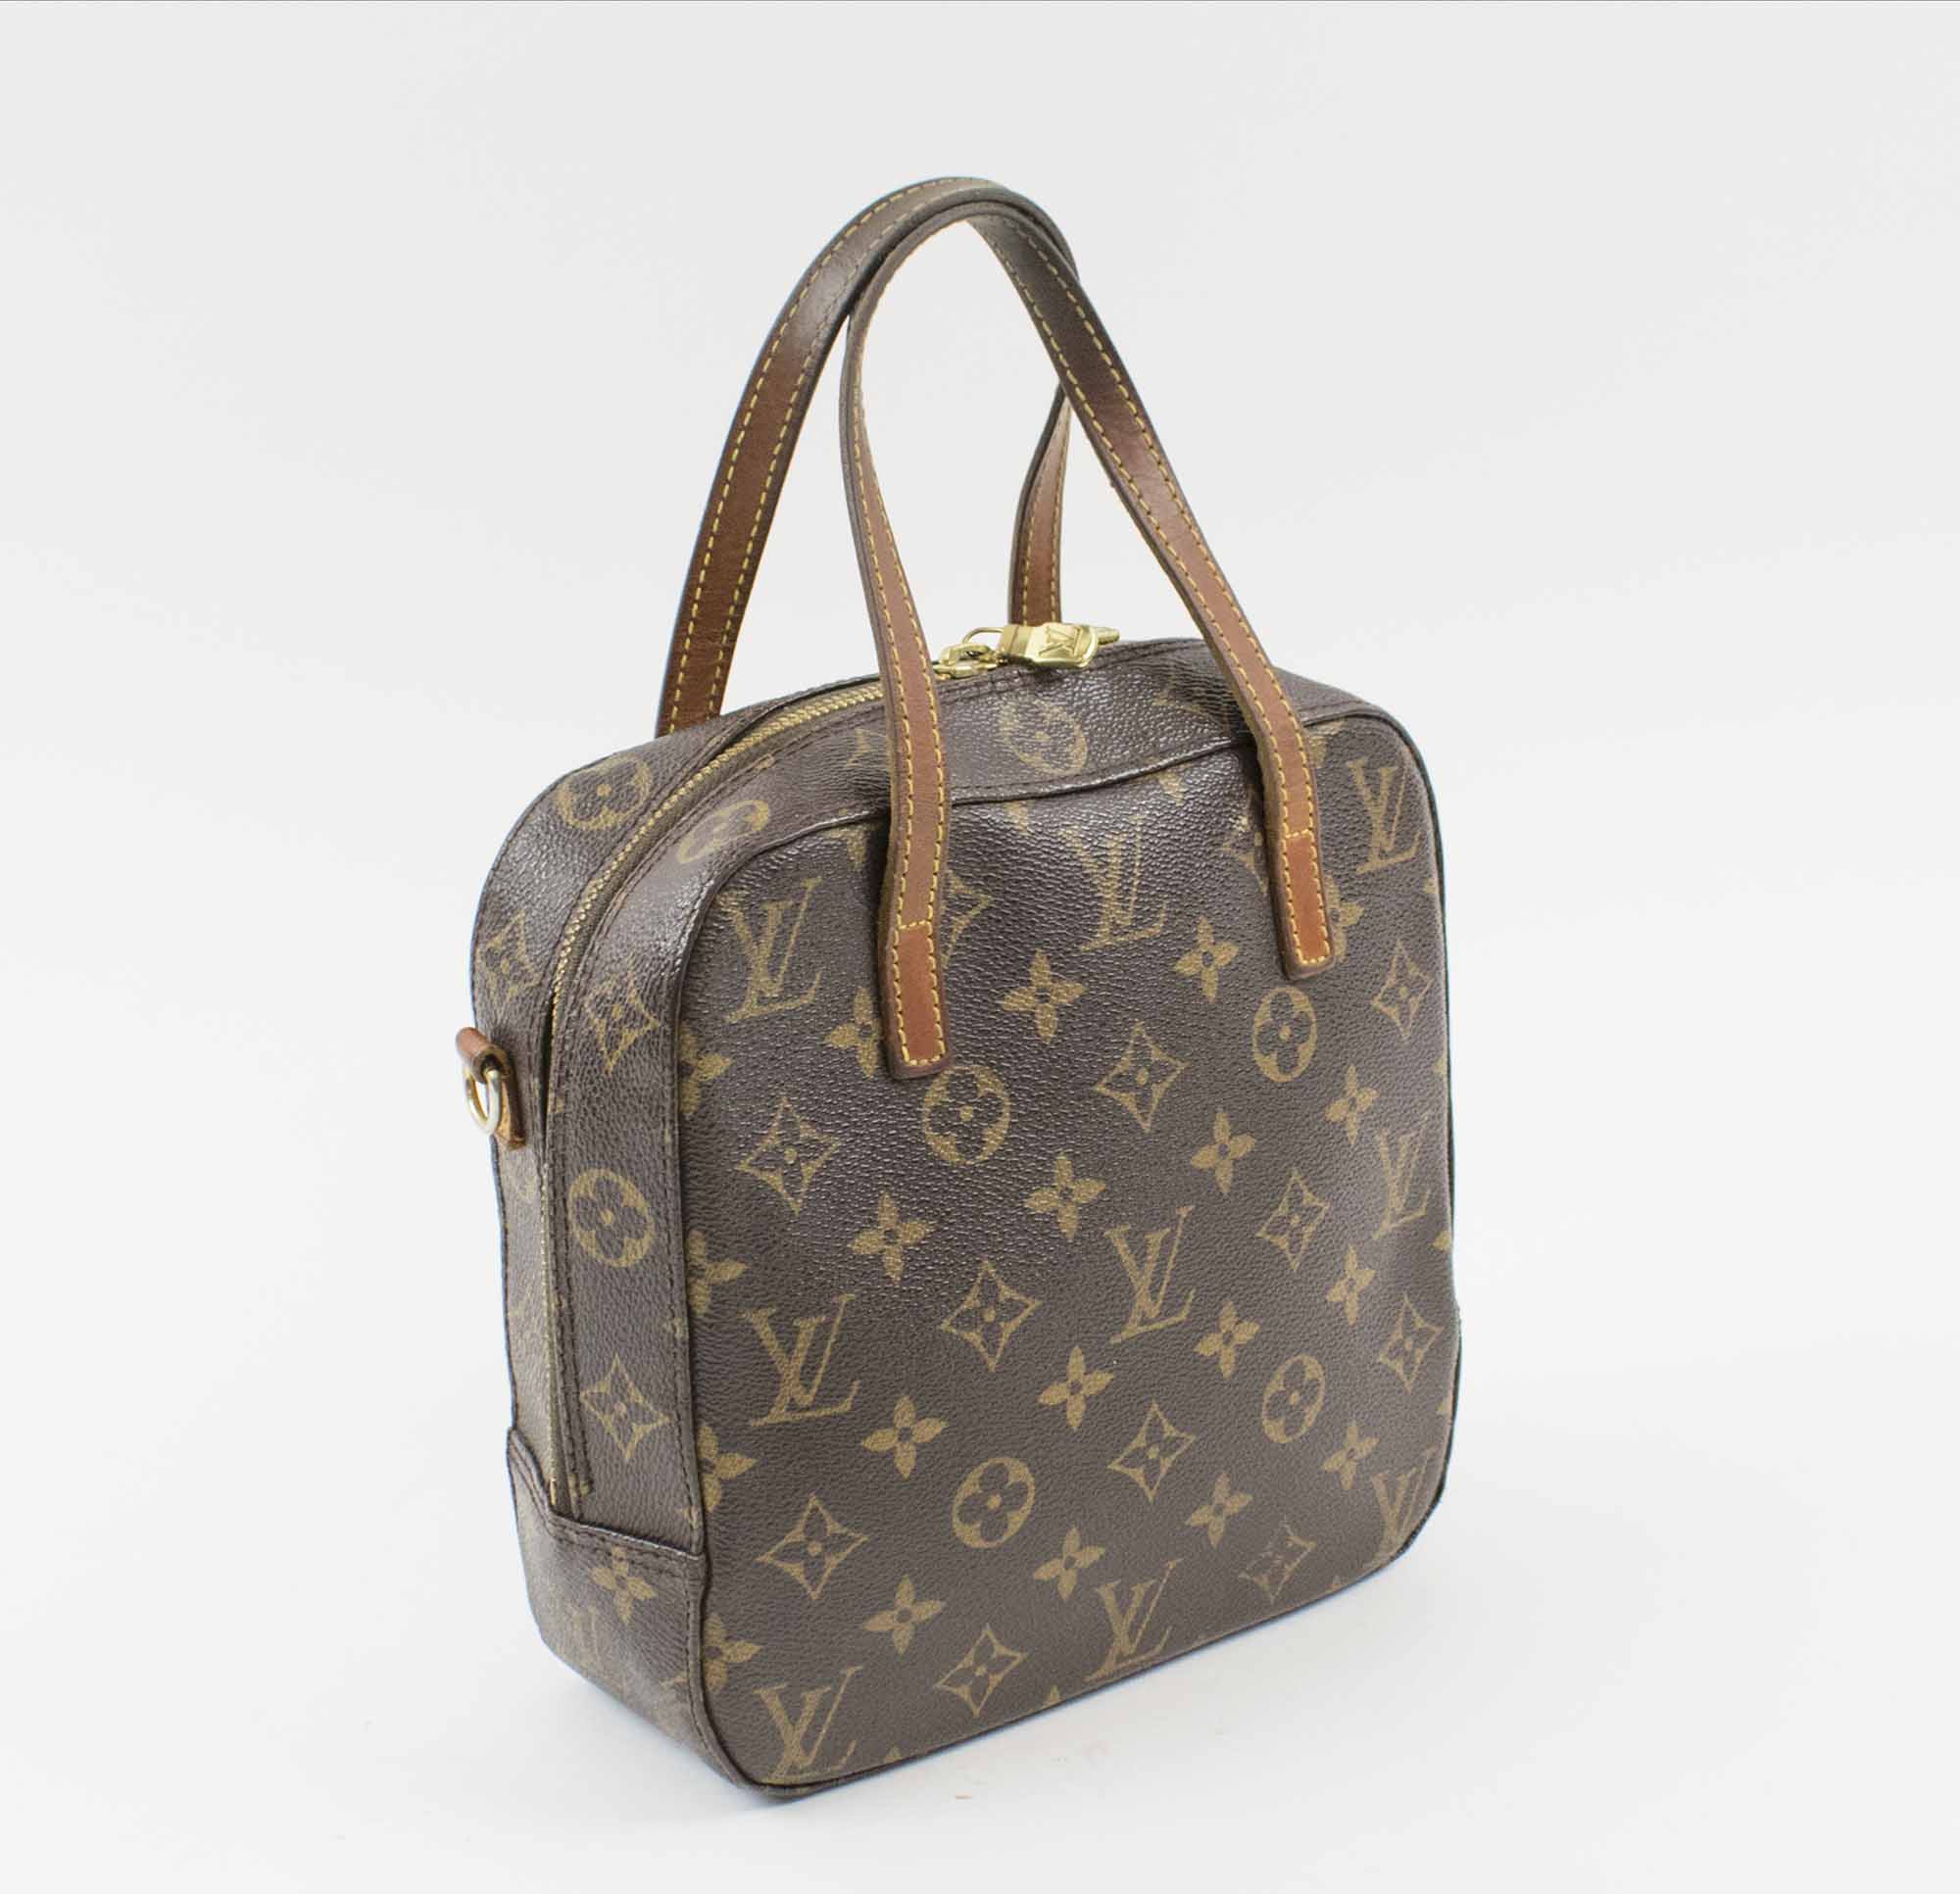 LOUIS VUITTON HANDBAG, monogram pattern with leather trims and two